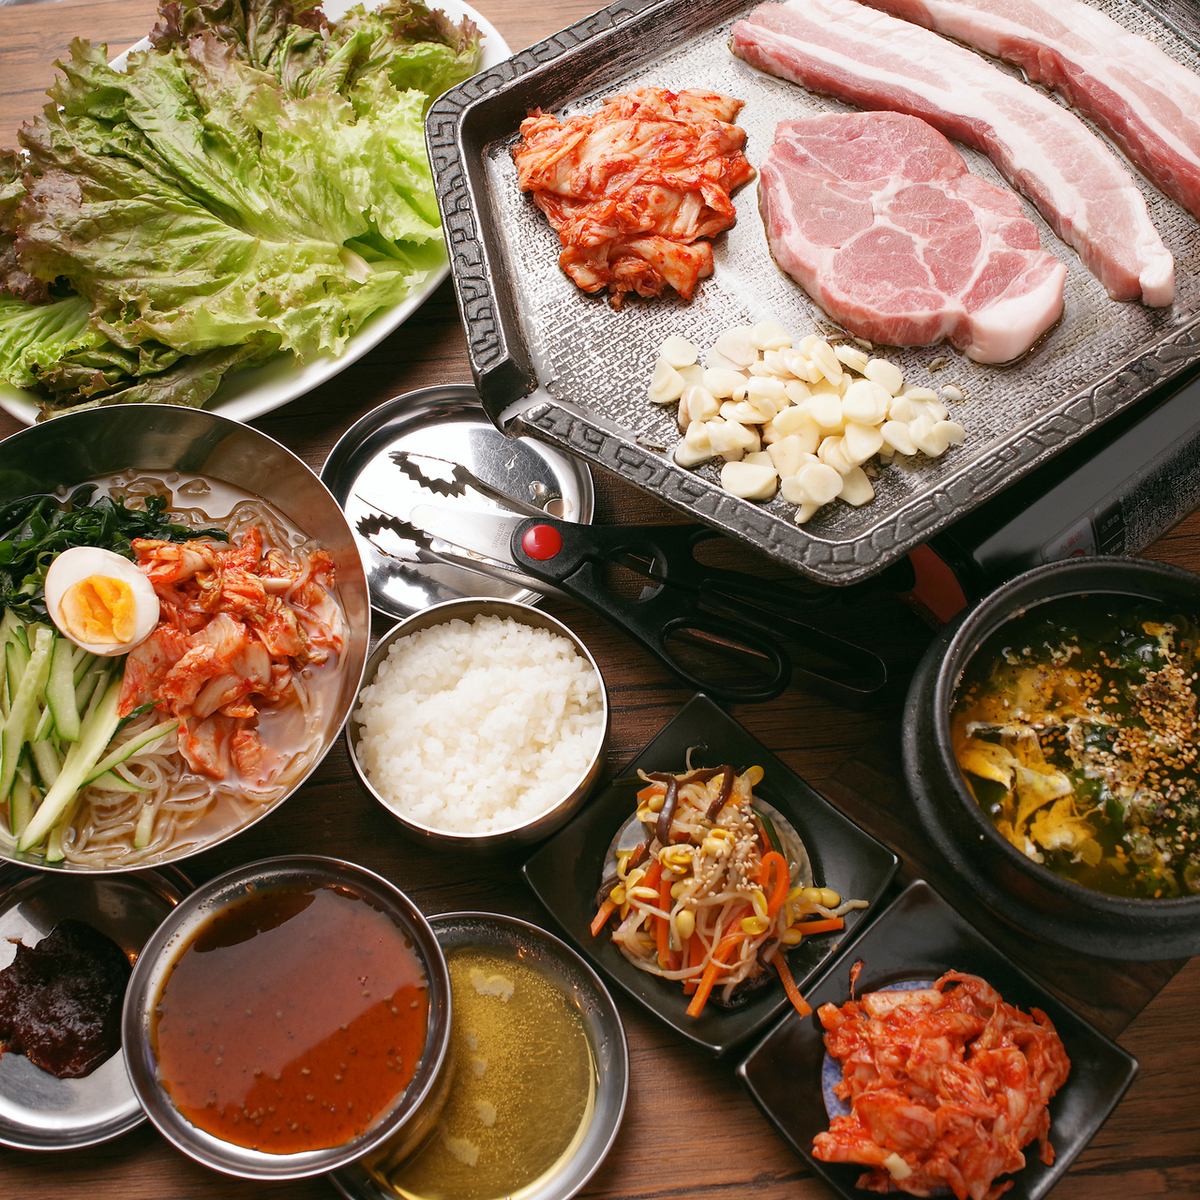 All-you-can-eat delicious Korean food ♪ All-you-can-drink options are also available.